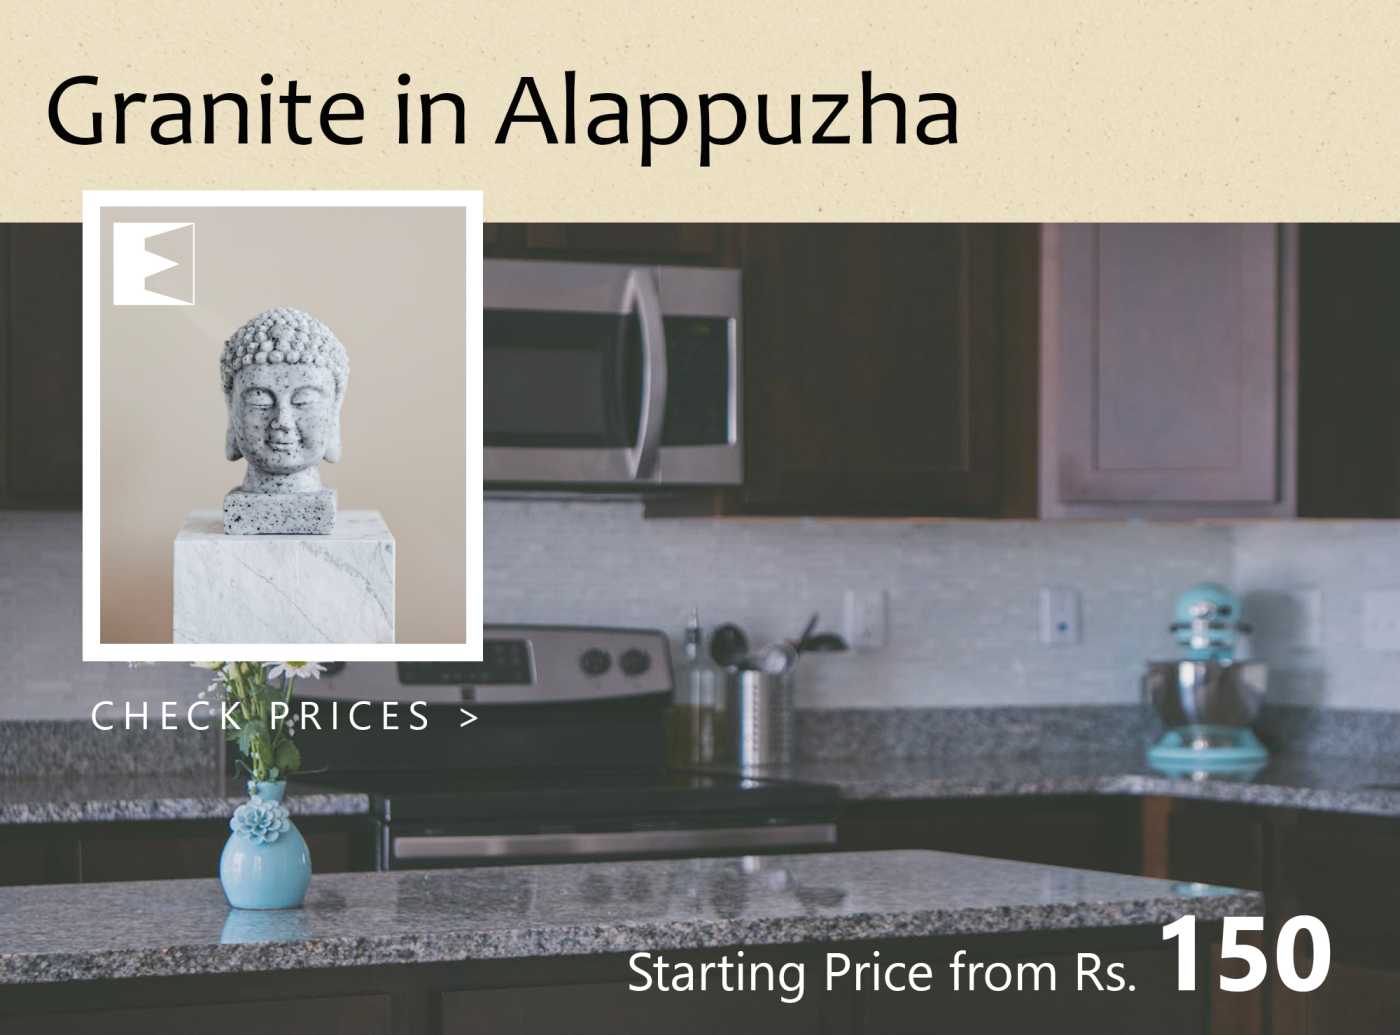 Granite Price in Alappuzha | Starting from 150 INR